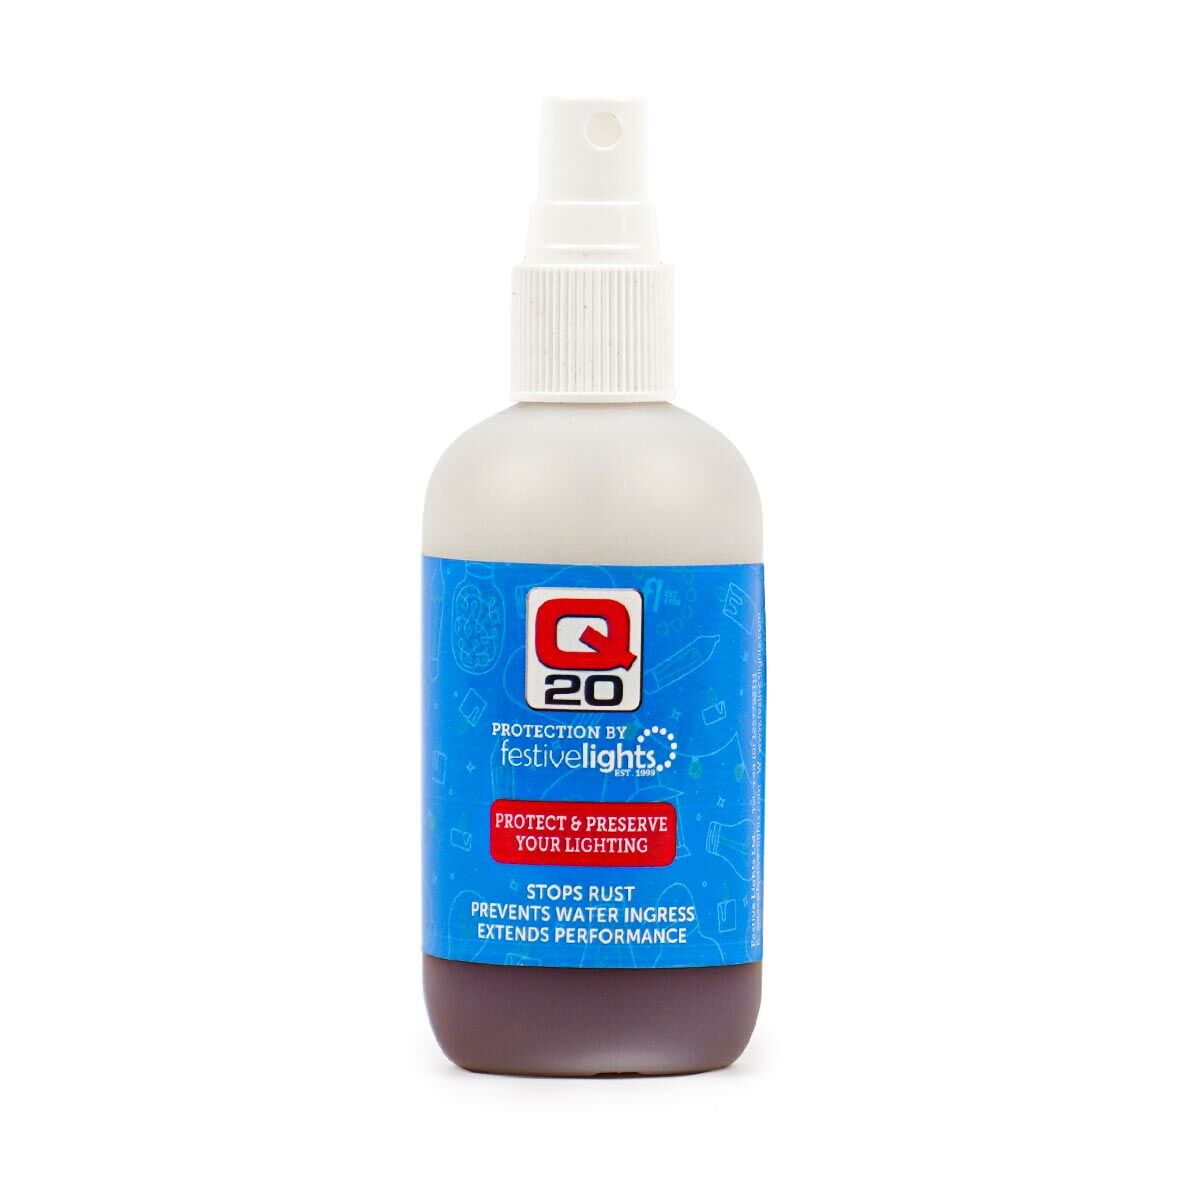 Q20 Multi Purpose Protection Spray for Outdoor Lights, 125ml image 1